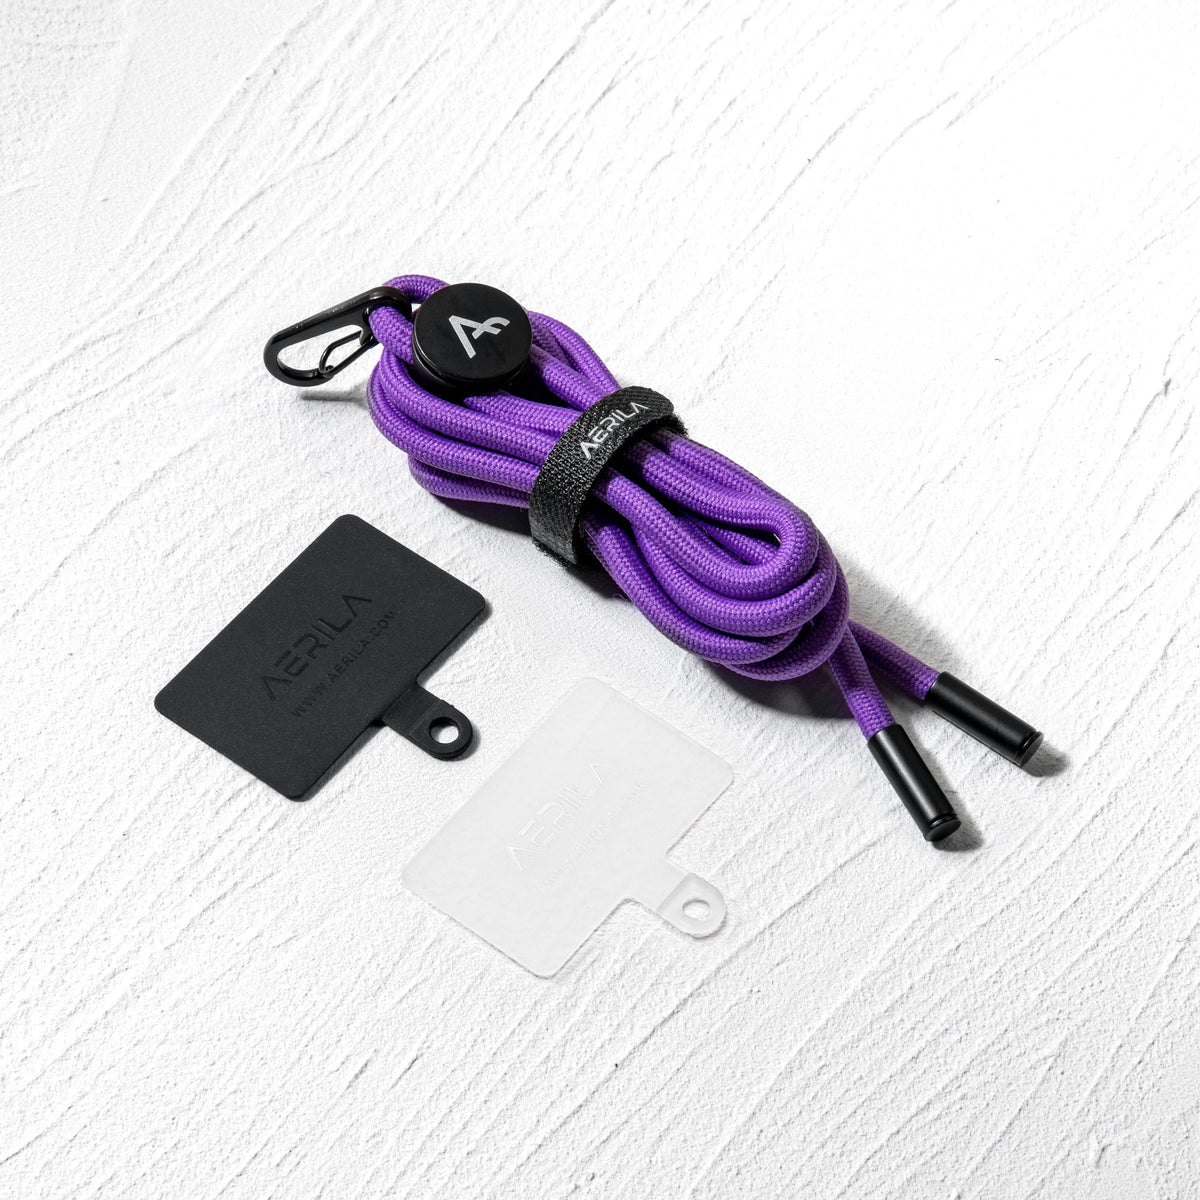 NORE Phone Lanyard set with Connector Patch Card | ESSENTIAL Collection - AERILA